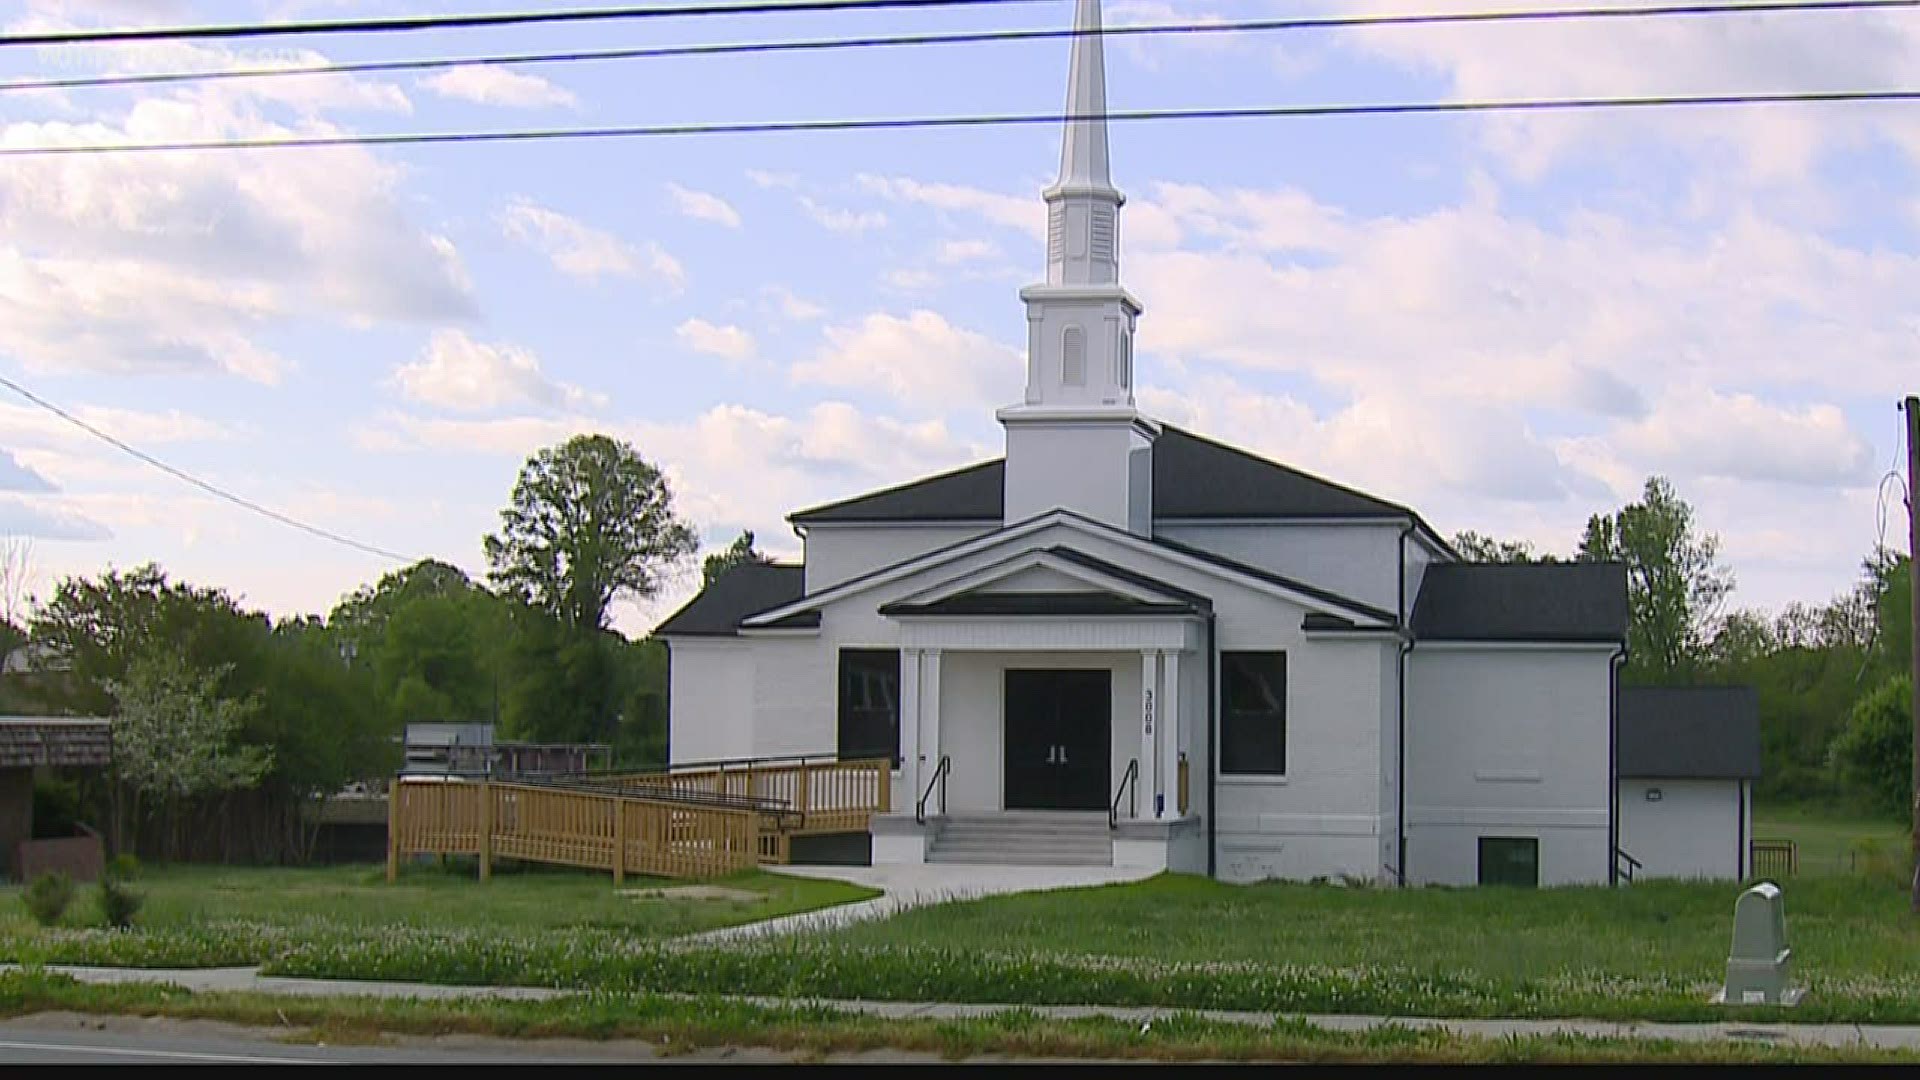 An EF2 tornado destroyed The Refuge in Greensboro on April 15, 2018. Two years later, the pastor reflects on his faithful journey to reopen the church.